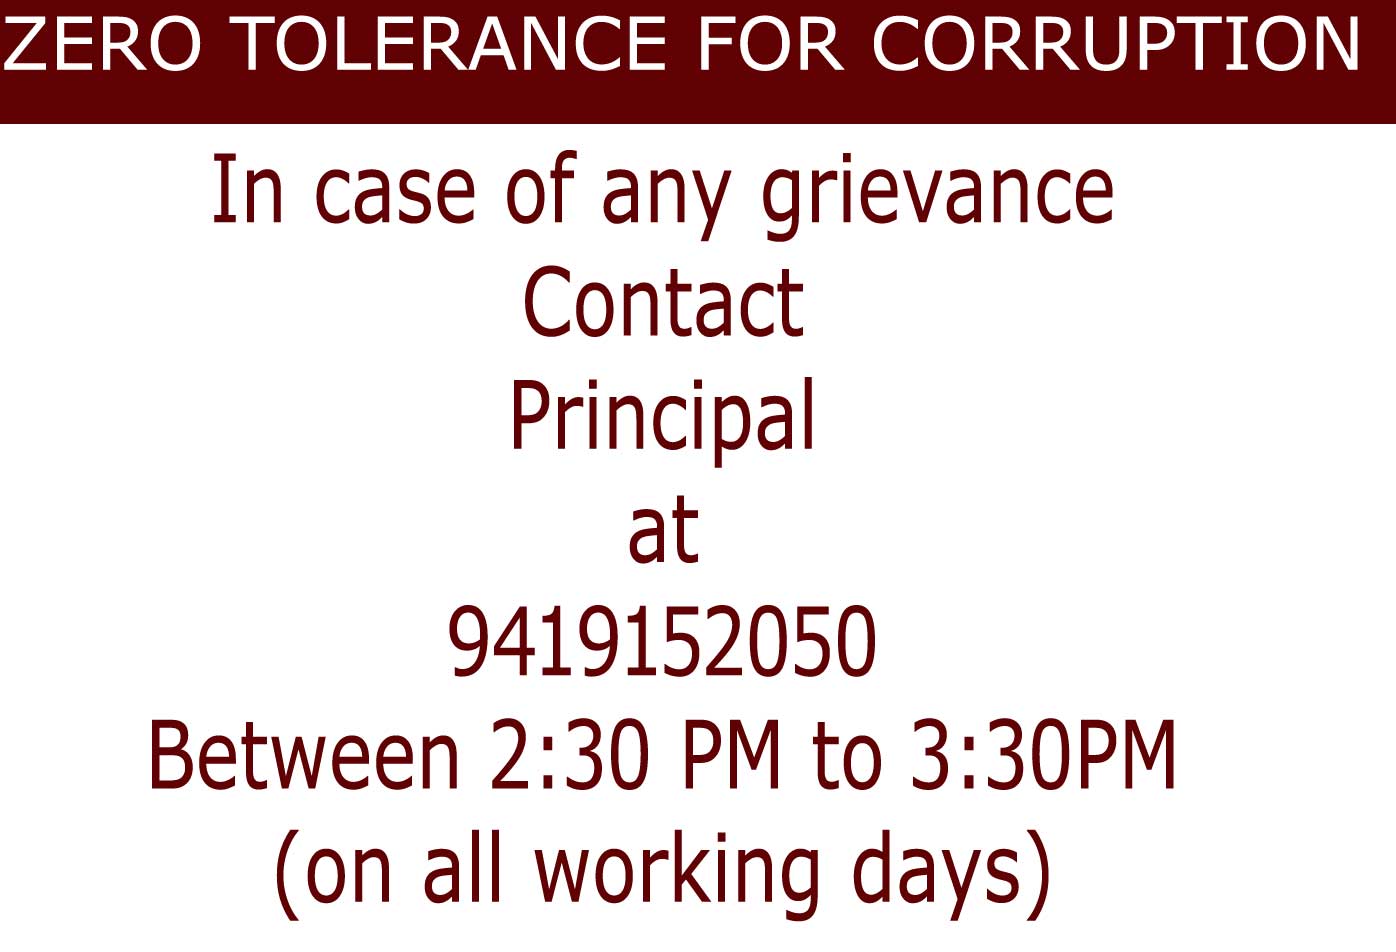 For any Grievance contact at 9419152050